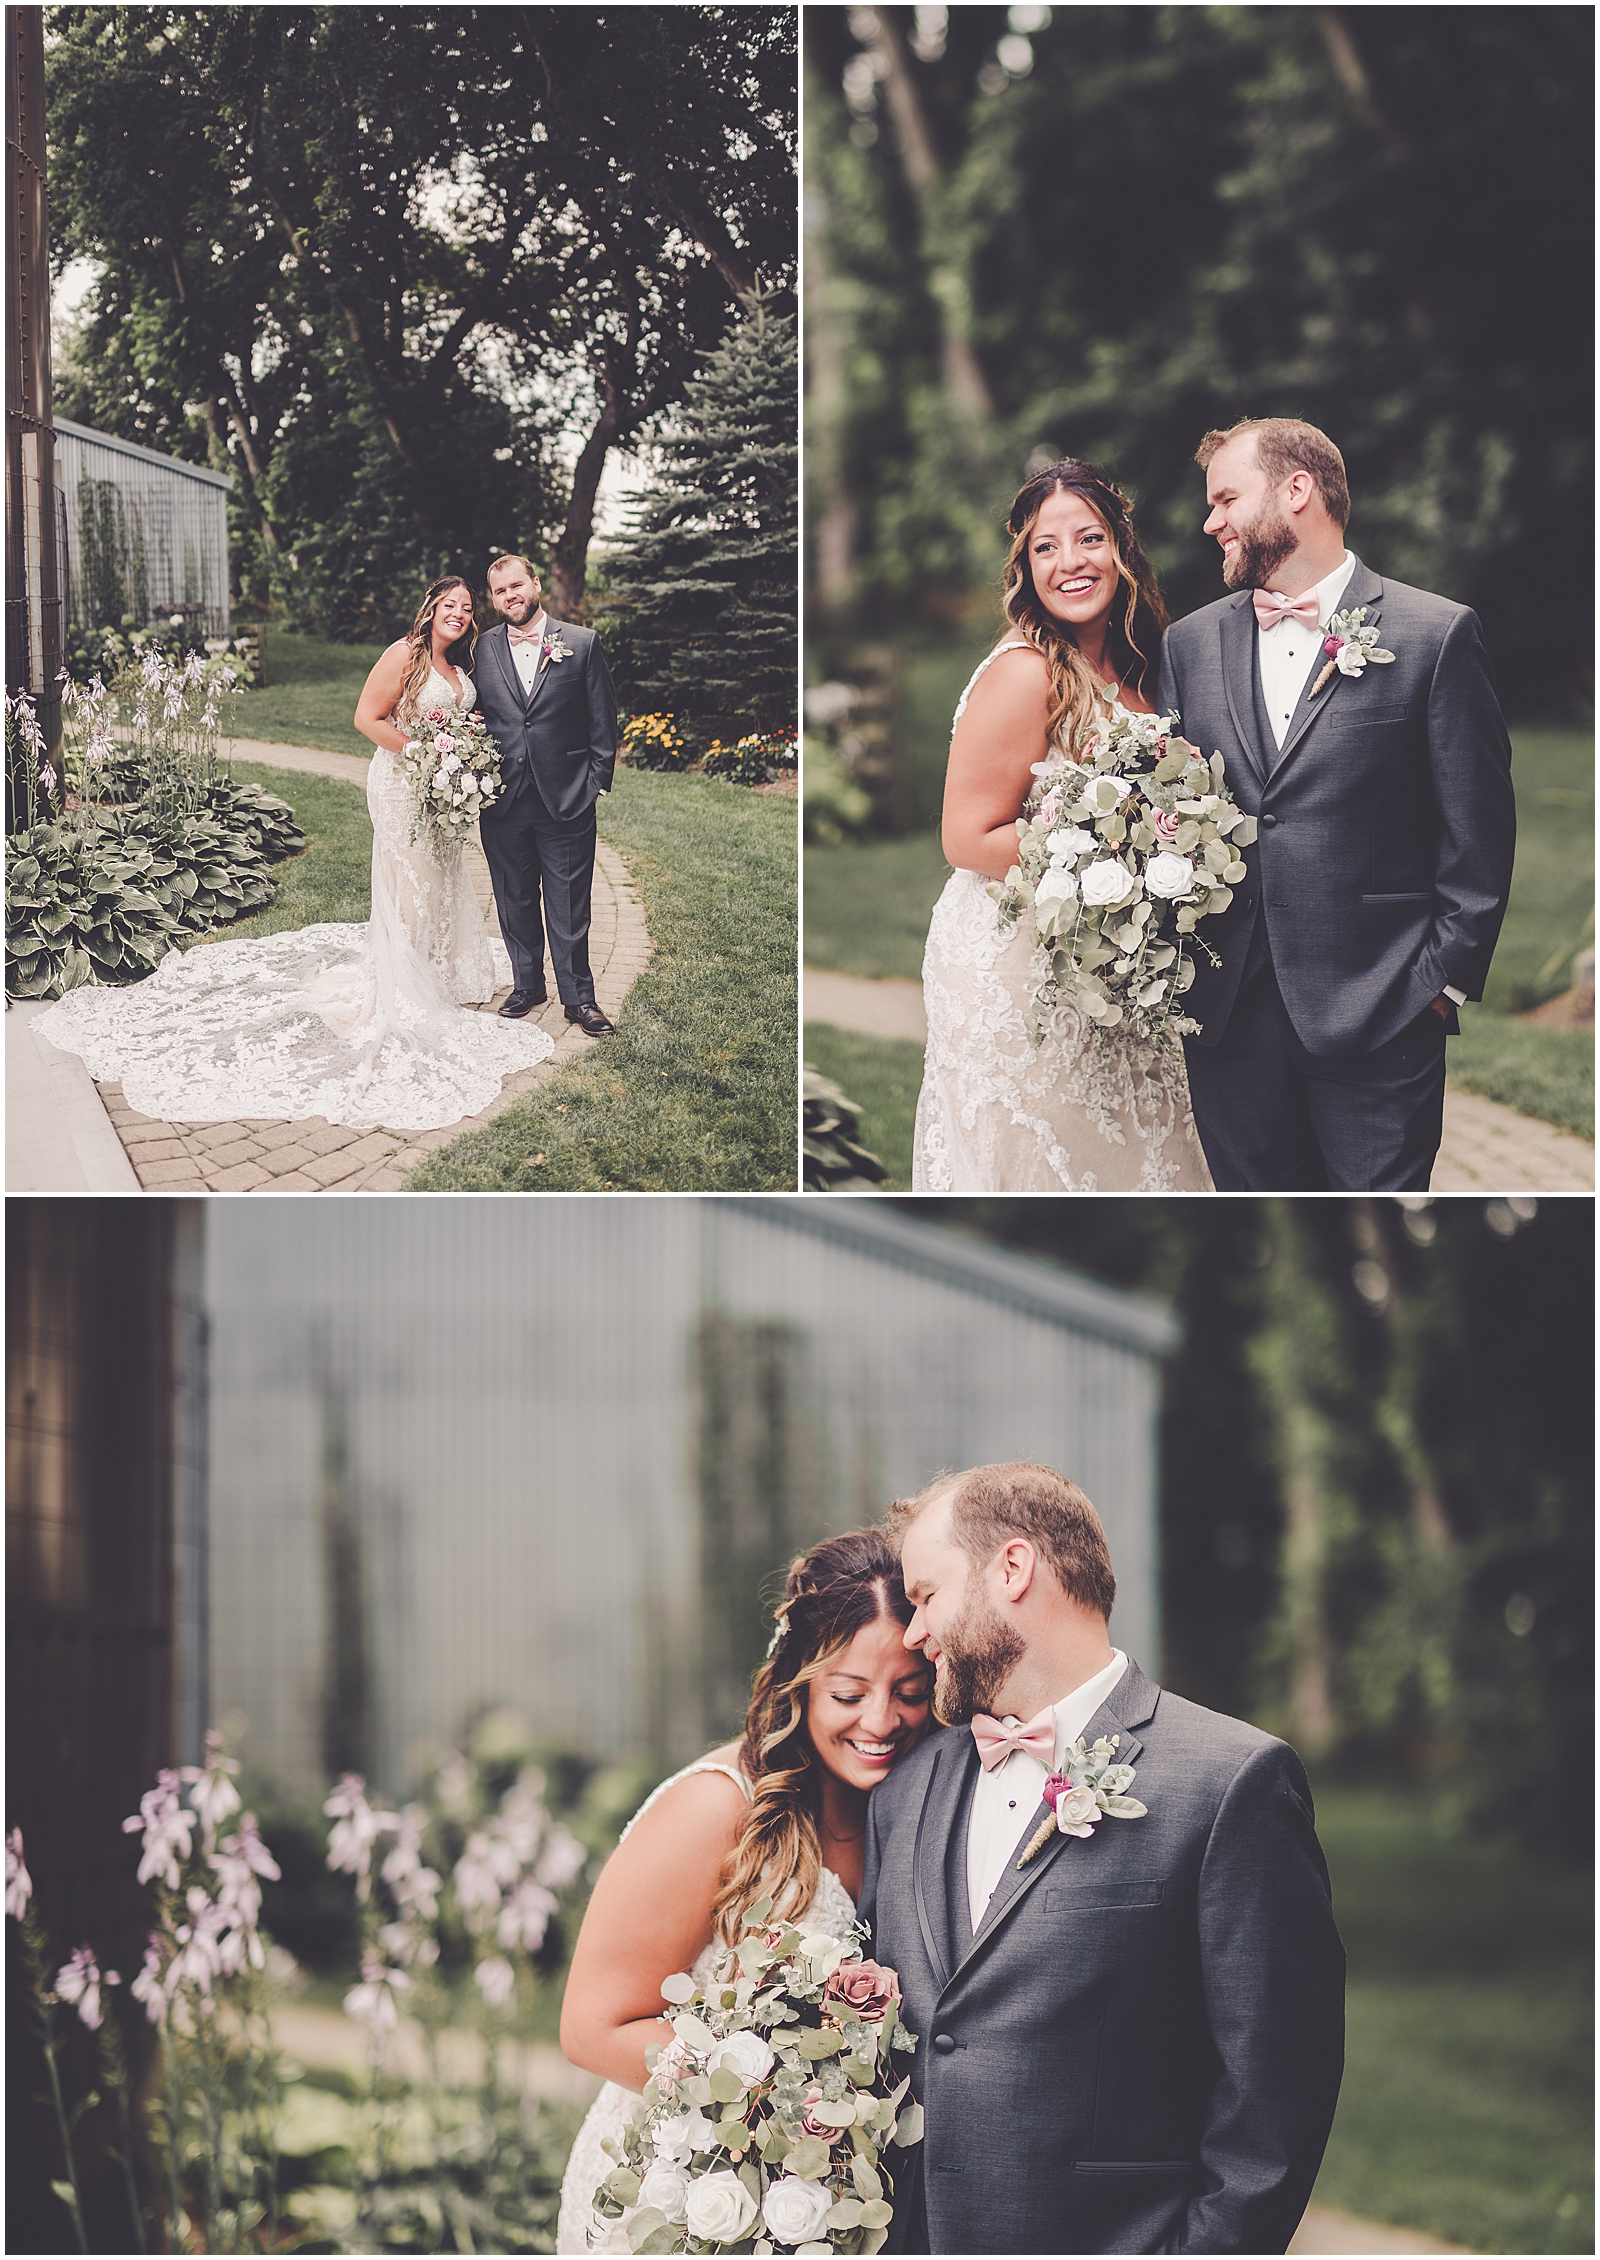 Daniela and Andrew's romantic August wedding at The Mora Farm in Waterman, IL with Chicagoland wedding photographer Kara Evans Photographer.